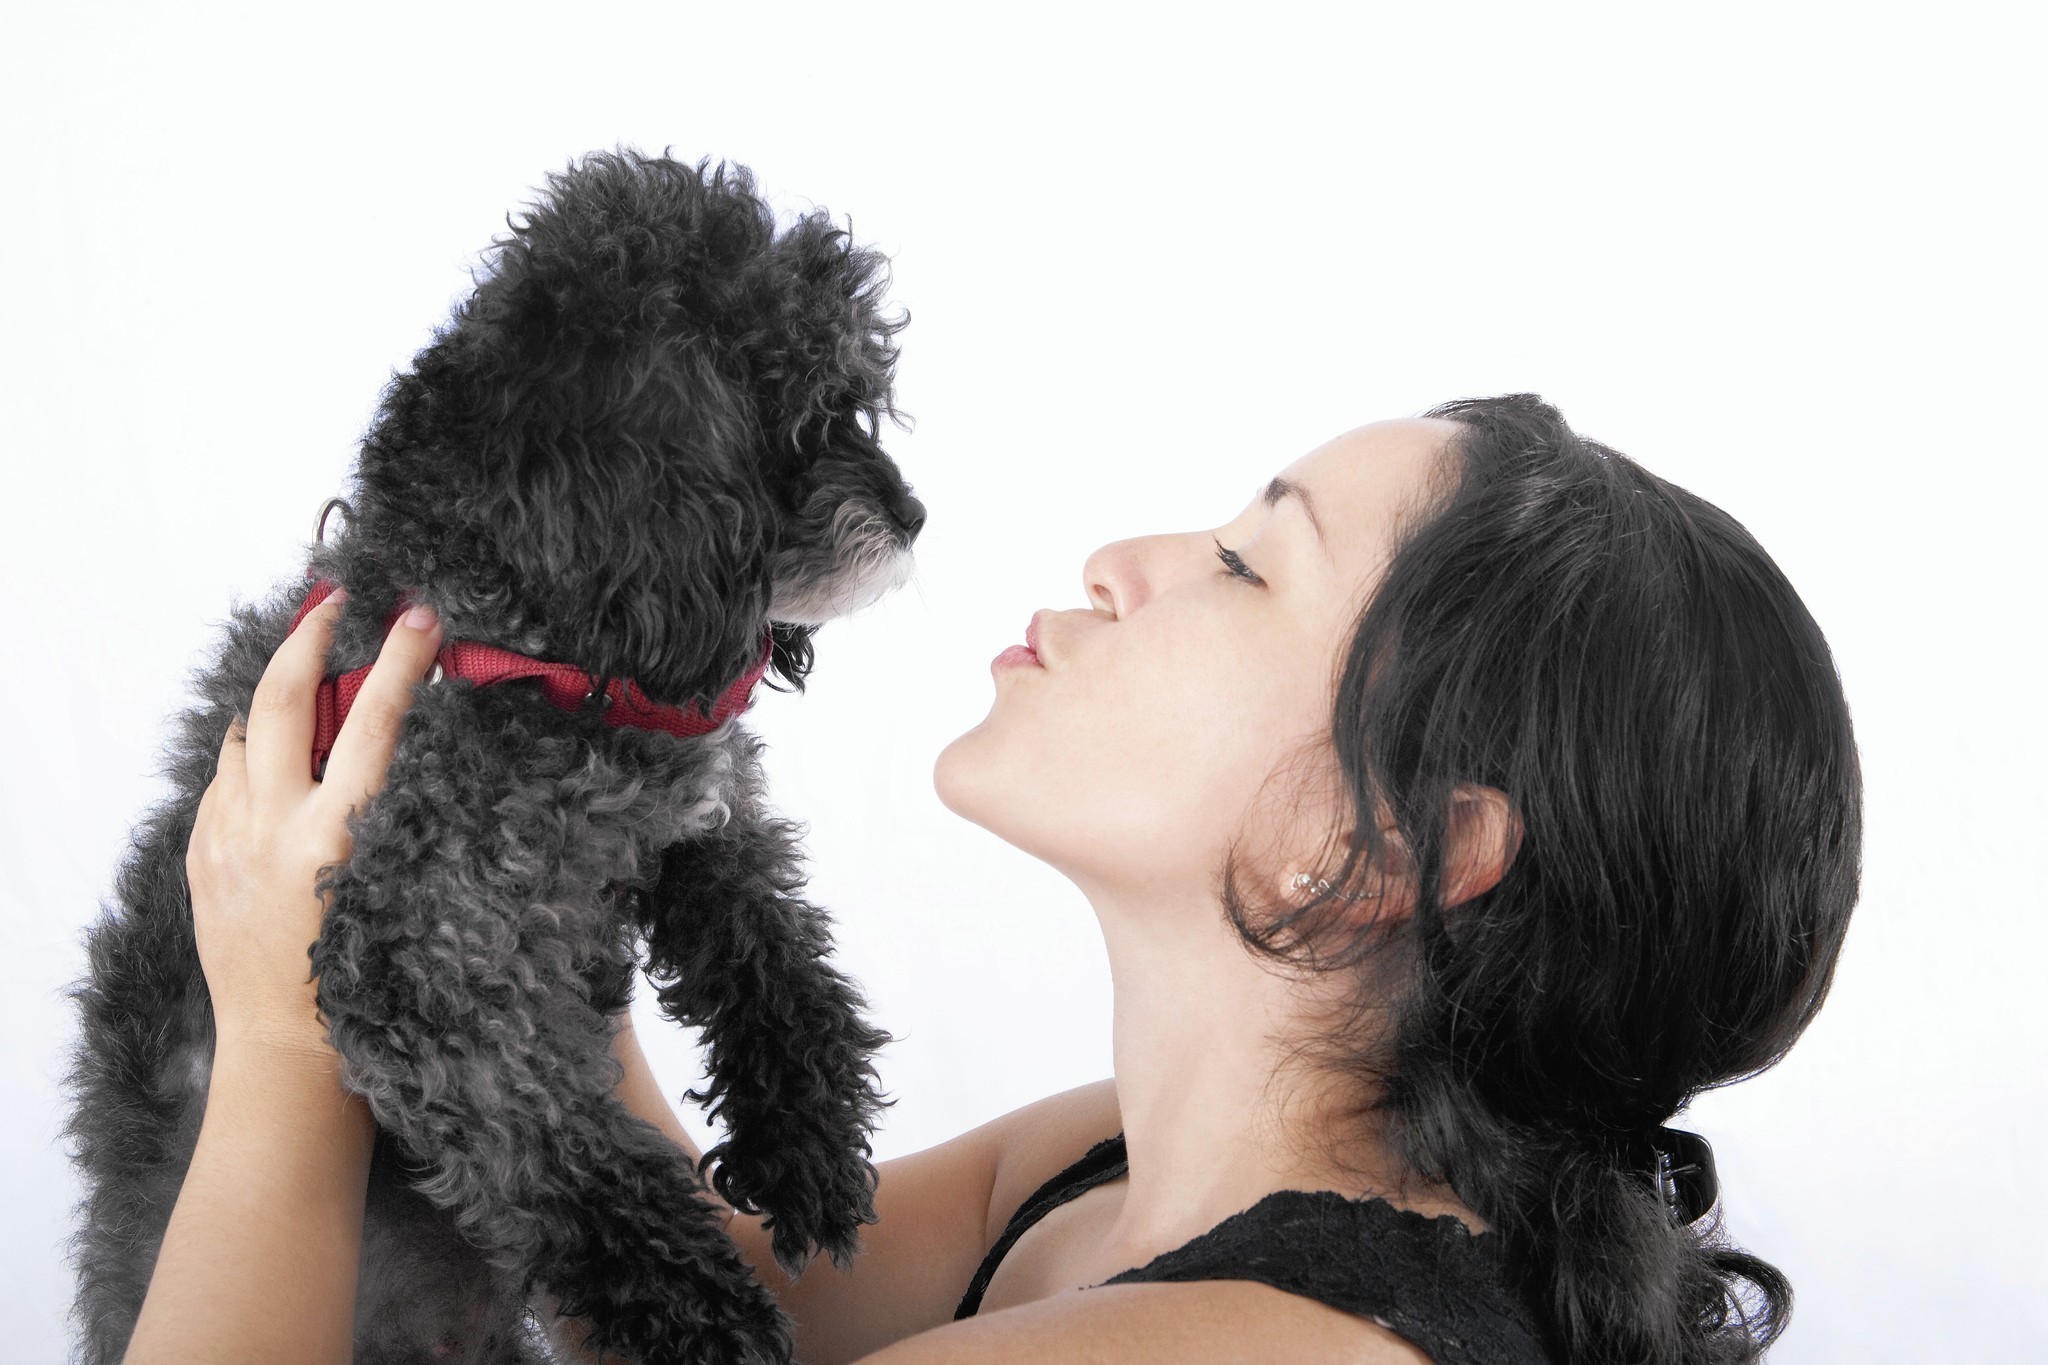 Partner kisses dog, then you. How to handle it. - Chicago Tribune